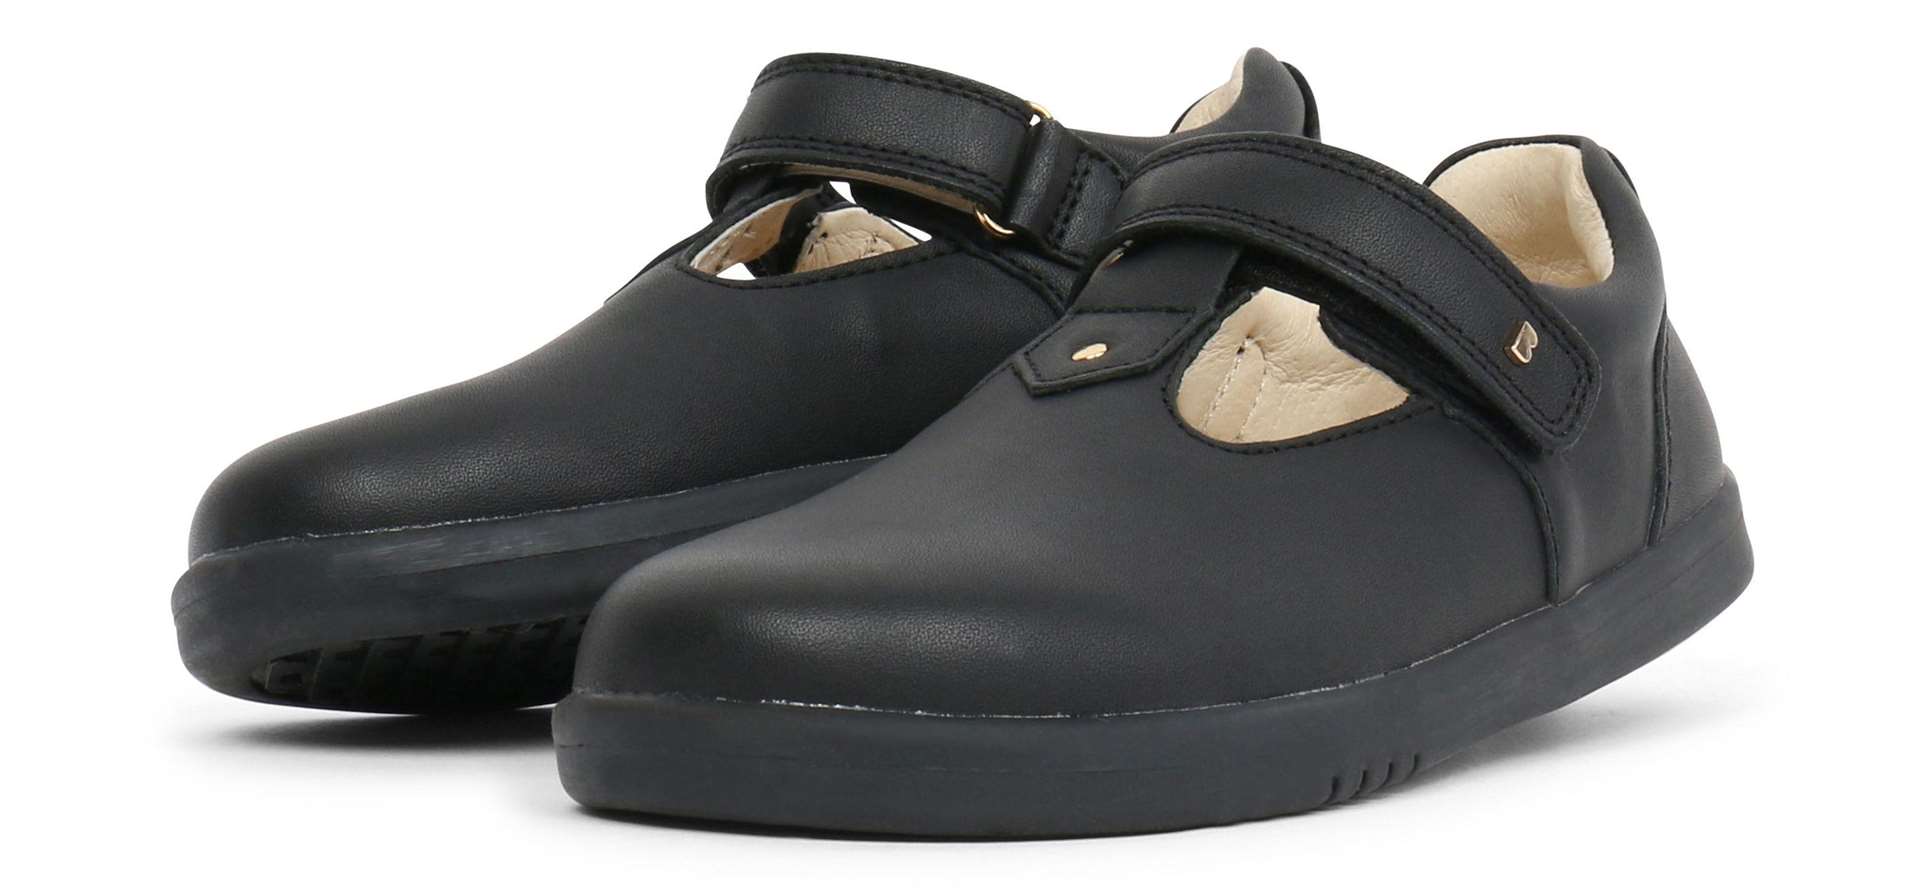 Kid+ Louise T-bar Shoe, from £46, Bobux